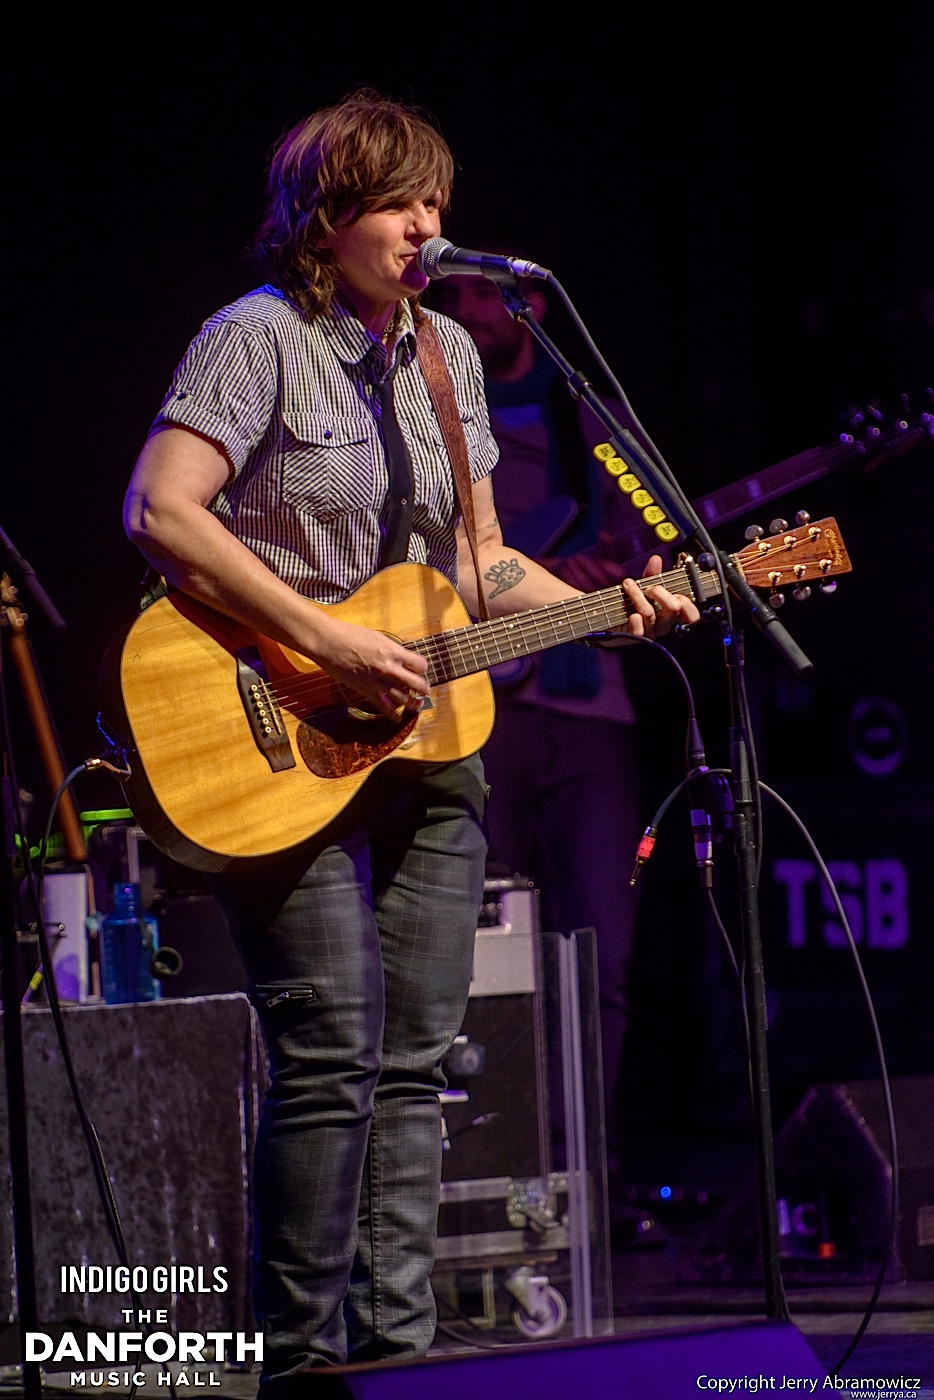 Indigo Girls play to a packed house at The Danforth Music Hall